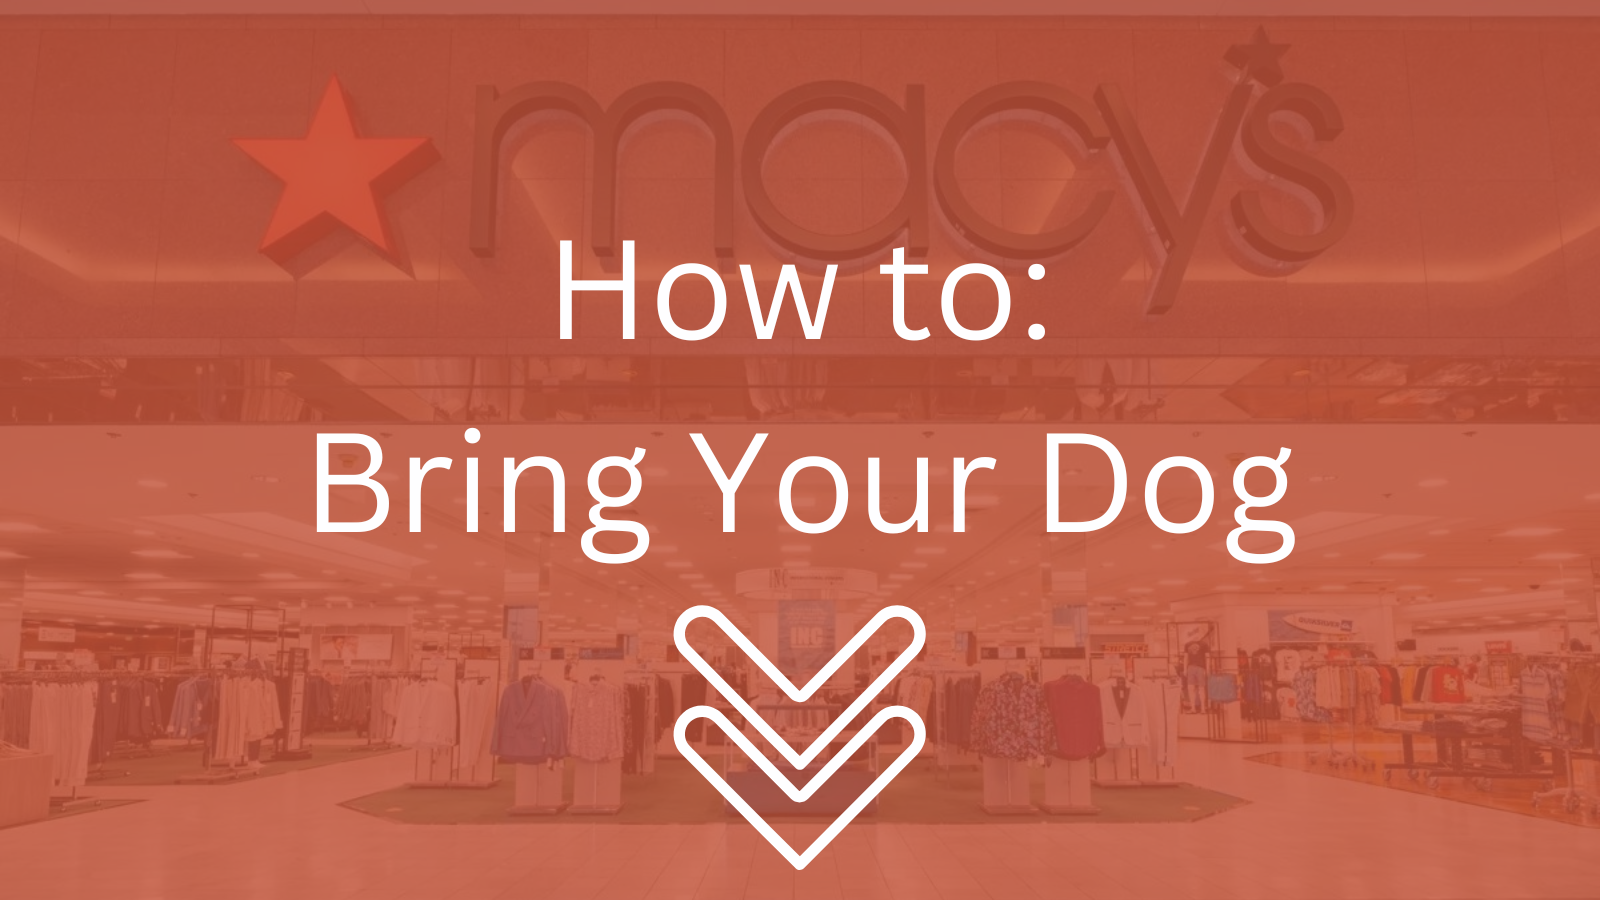 Image Text: "How to: Bring Your Dog"